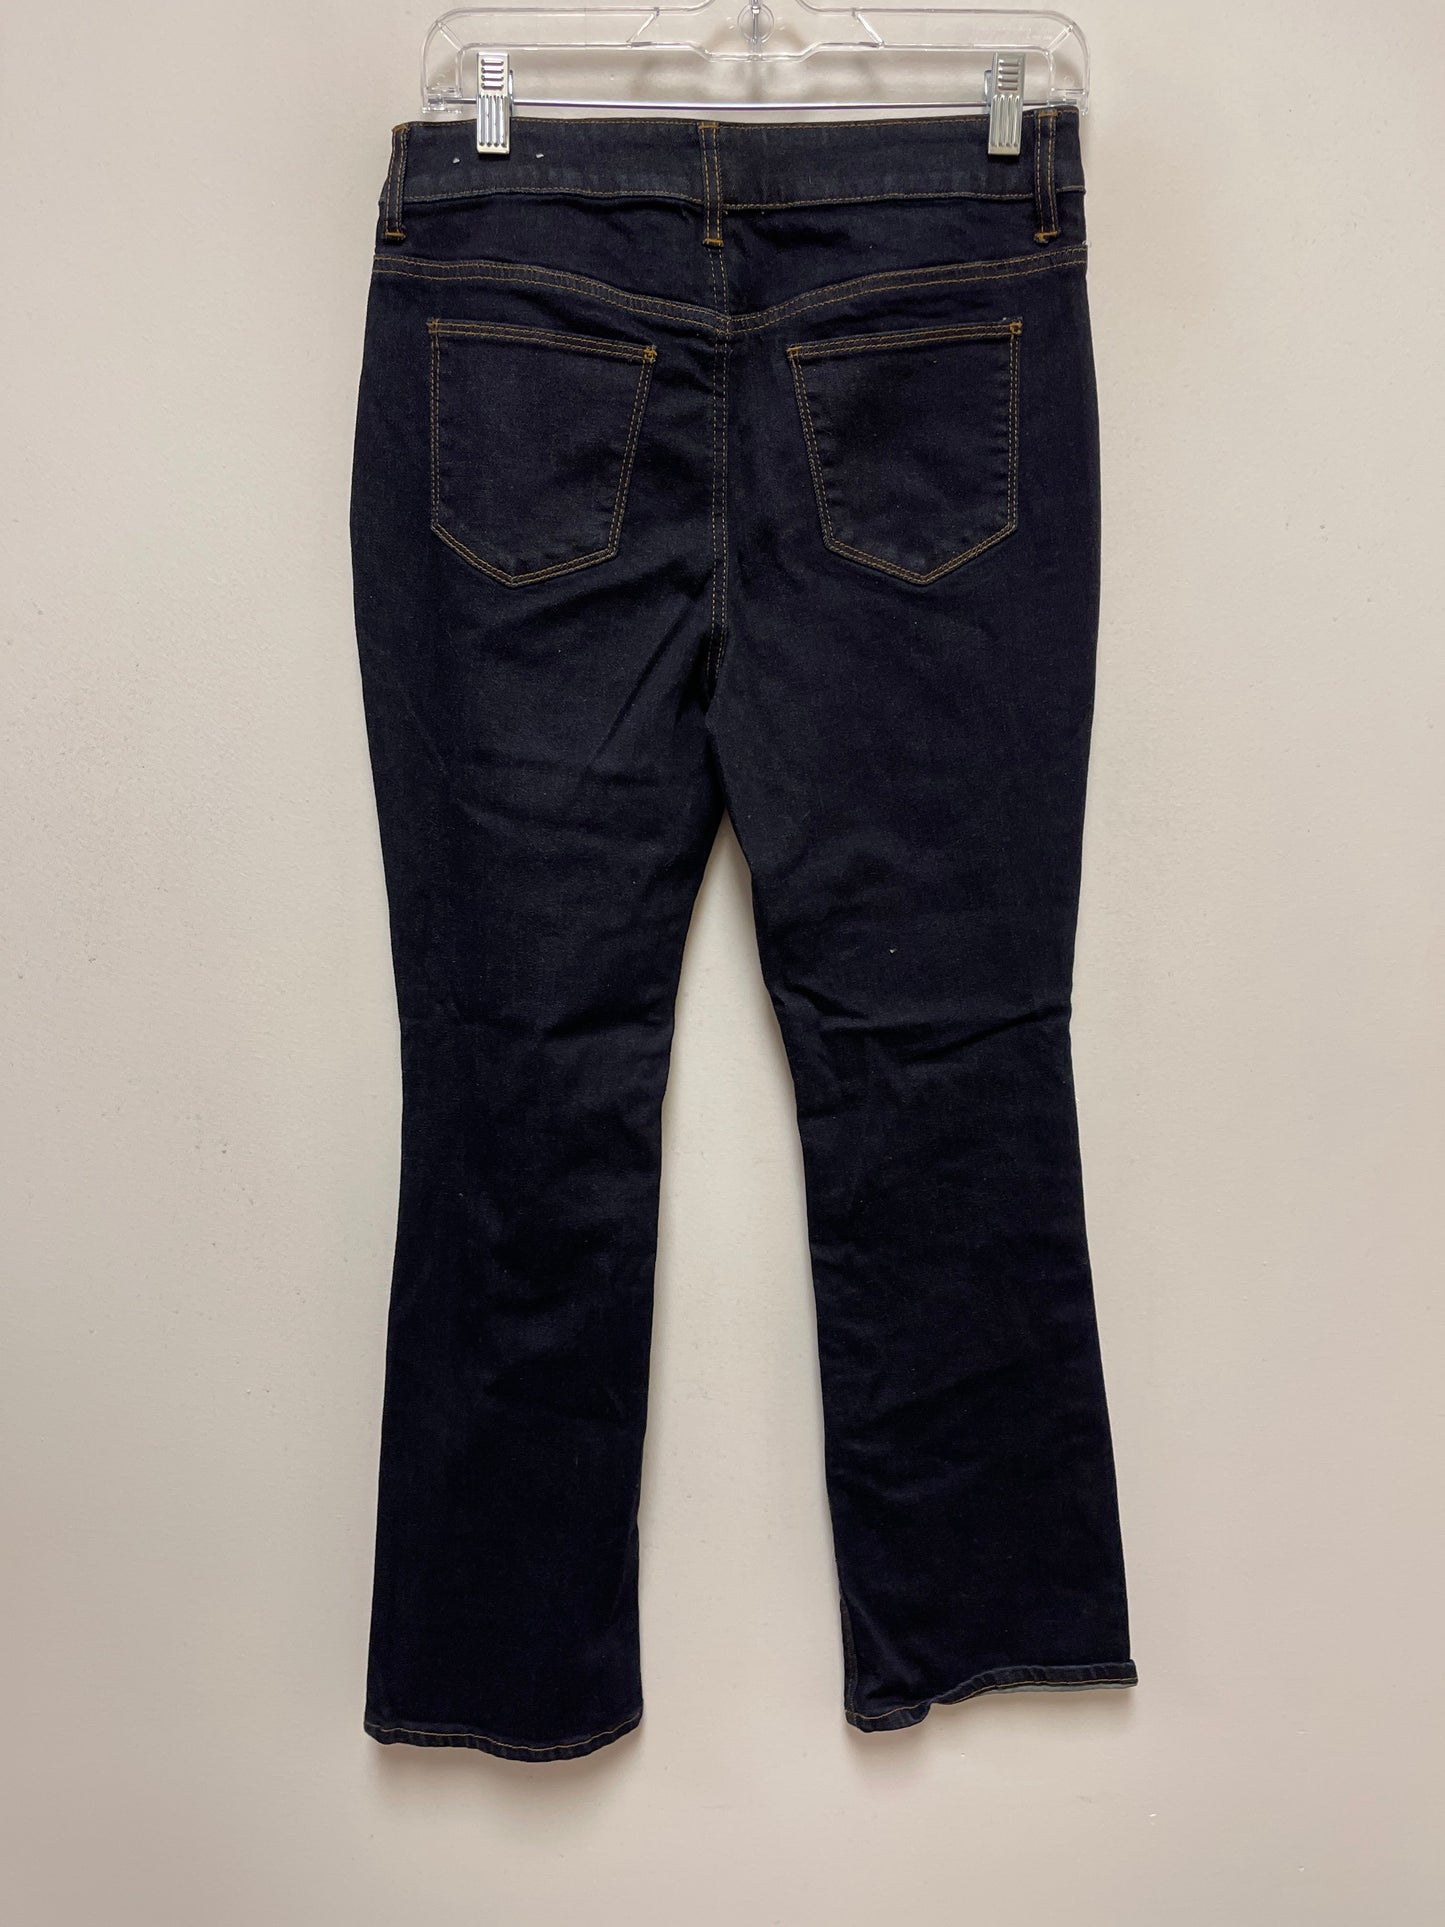 Blue Denim Jeans Flared Chicos, Size 4